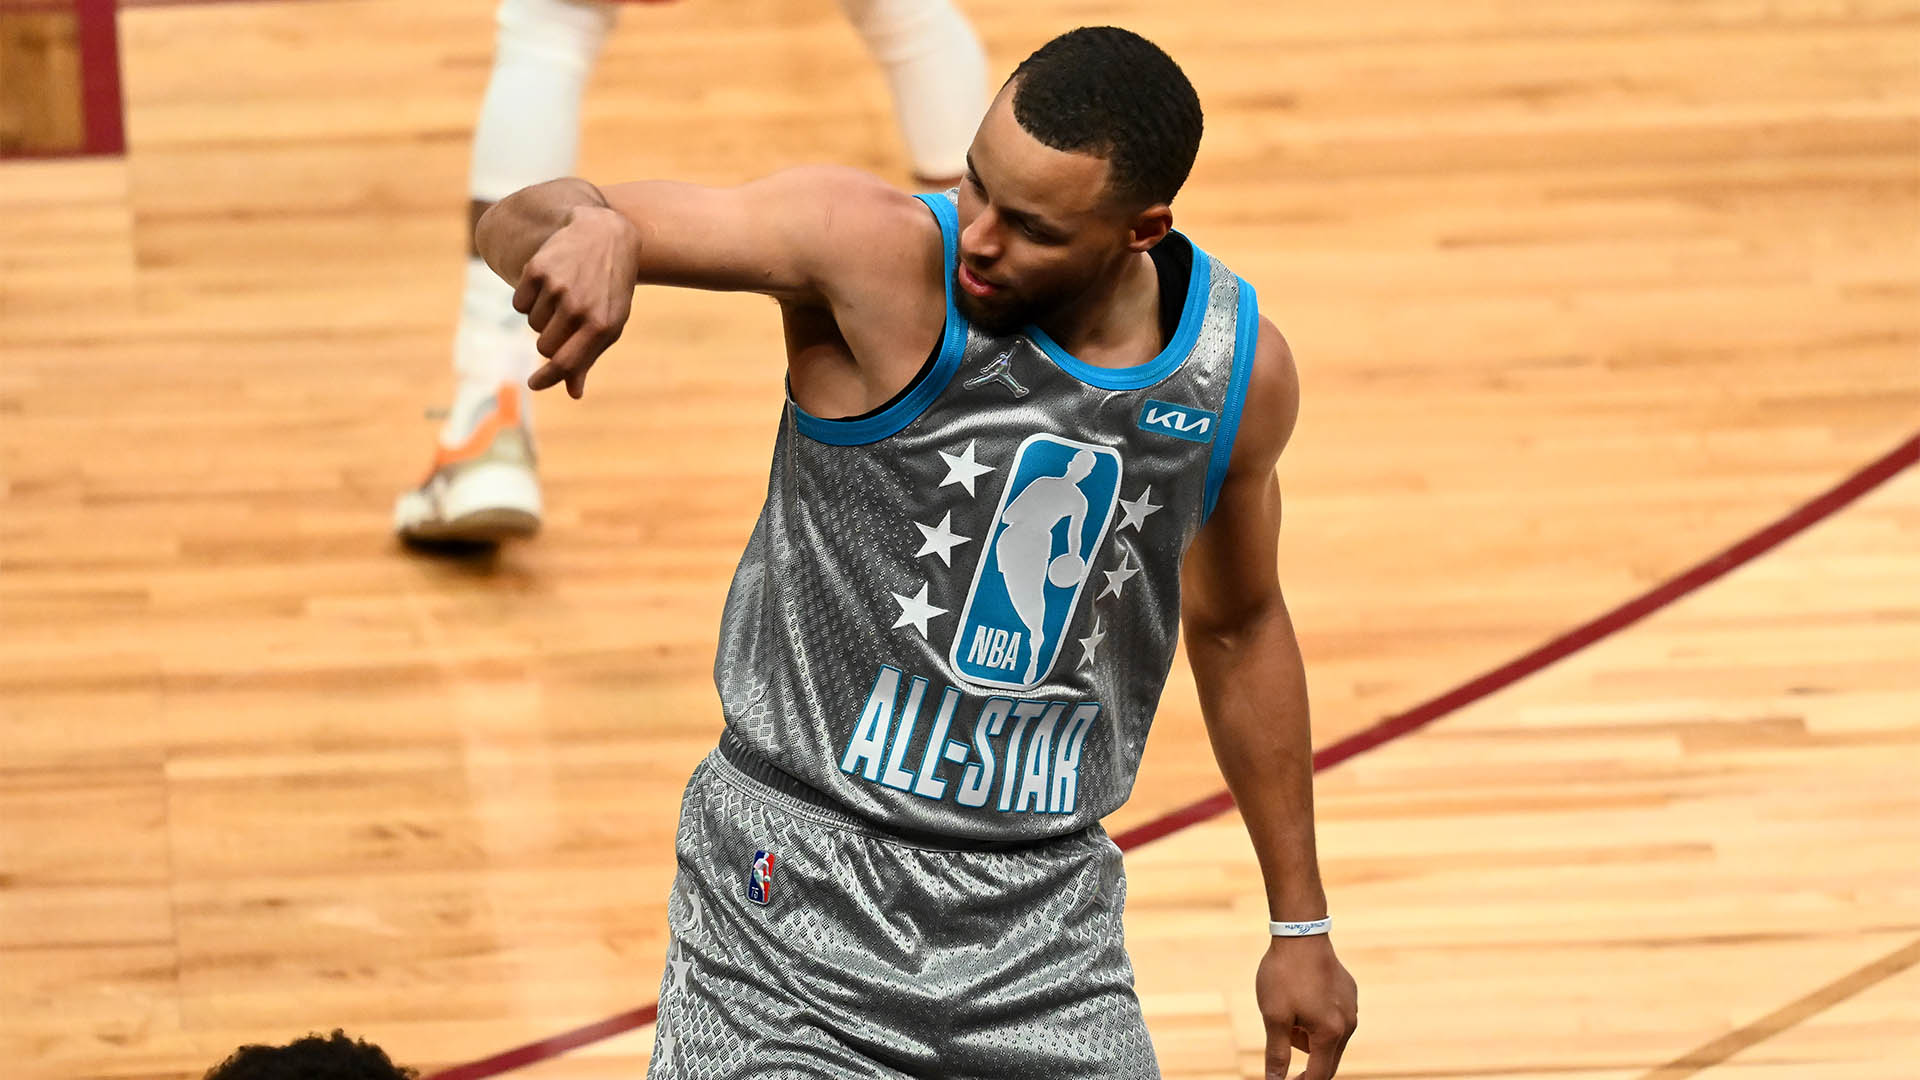 LeBron James edges Giannis Antetokounmpo and Stephen Curry to lead NBA  jersey sales again